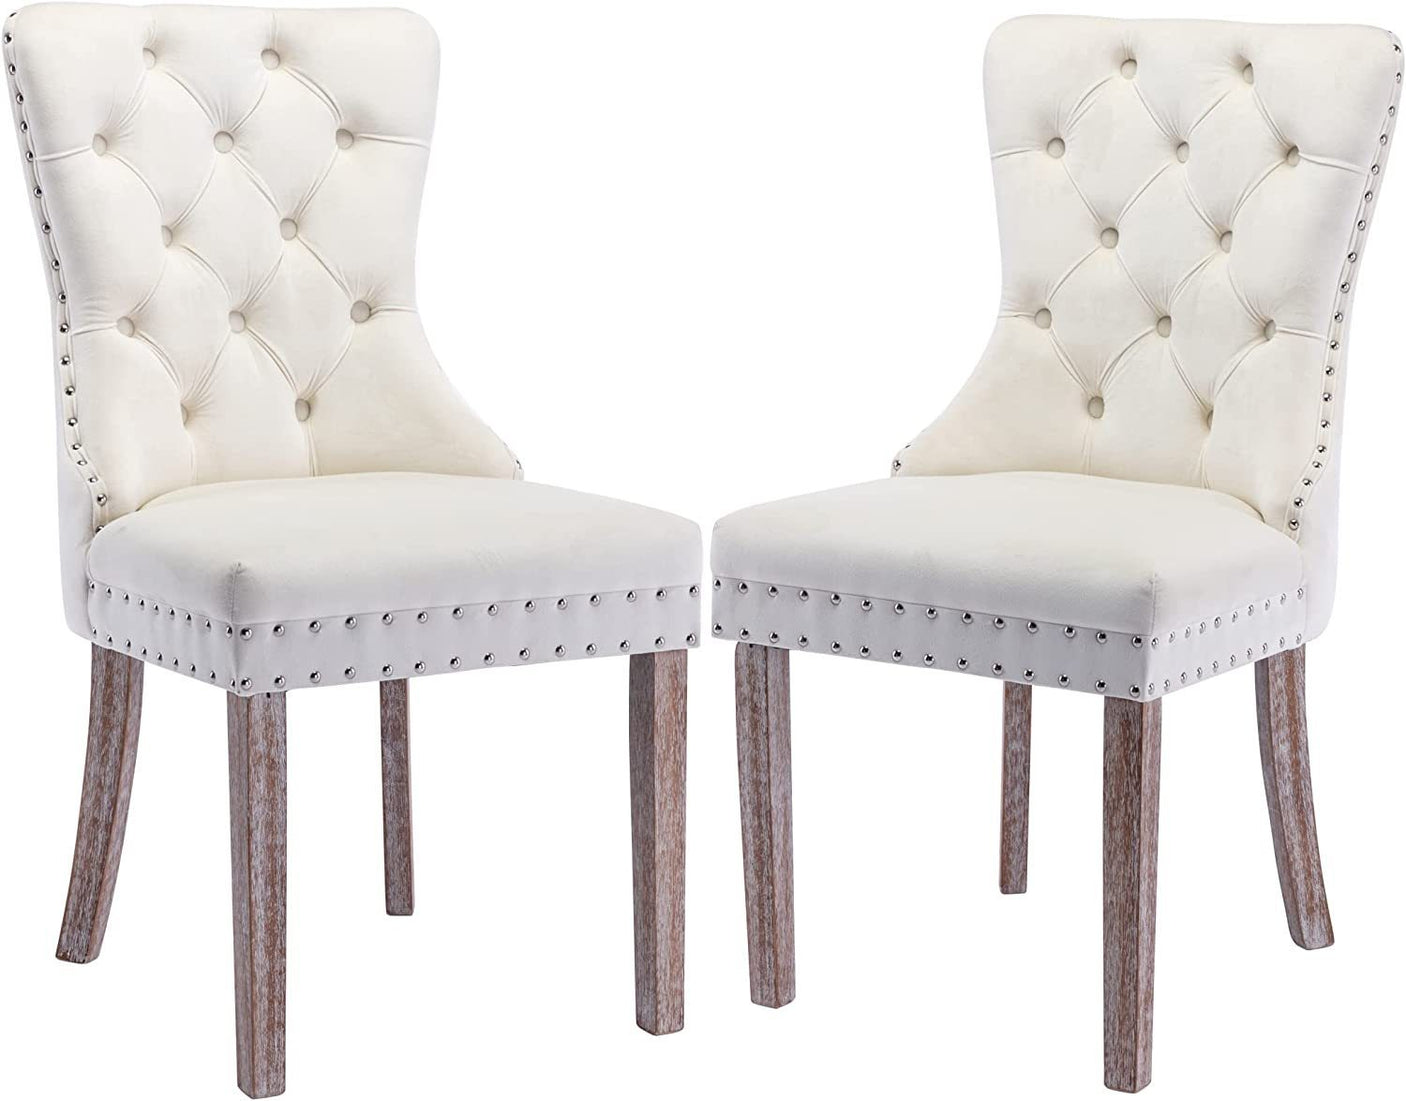 Dining Chairs Set of 2,Velvet Tufted Upholstered Room Chairs with Nailhead Trim,Kitchen Chair with Solid Wood Legs,Beige - Home Elegance USA